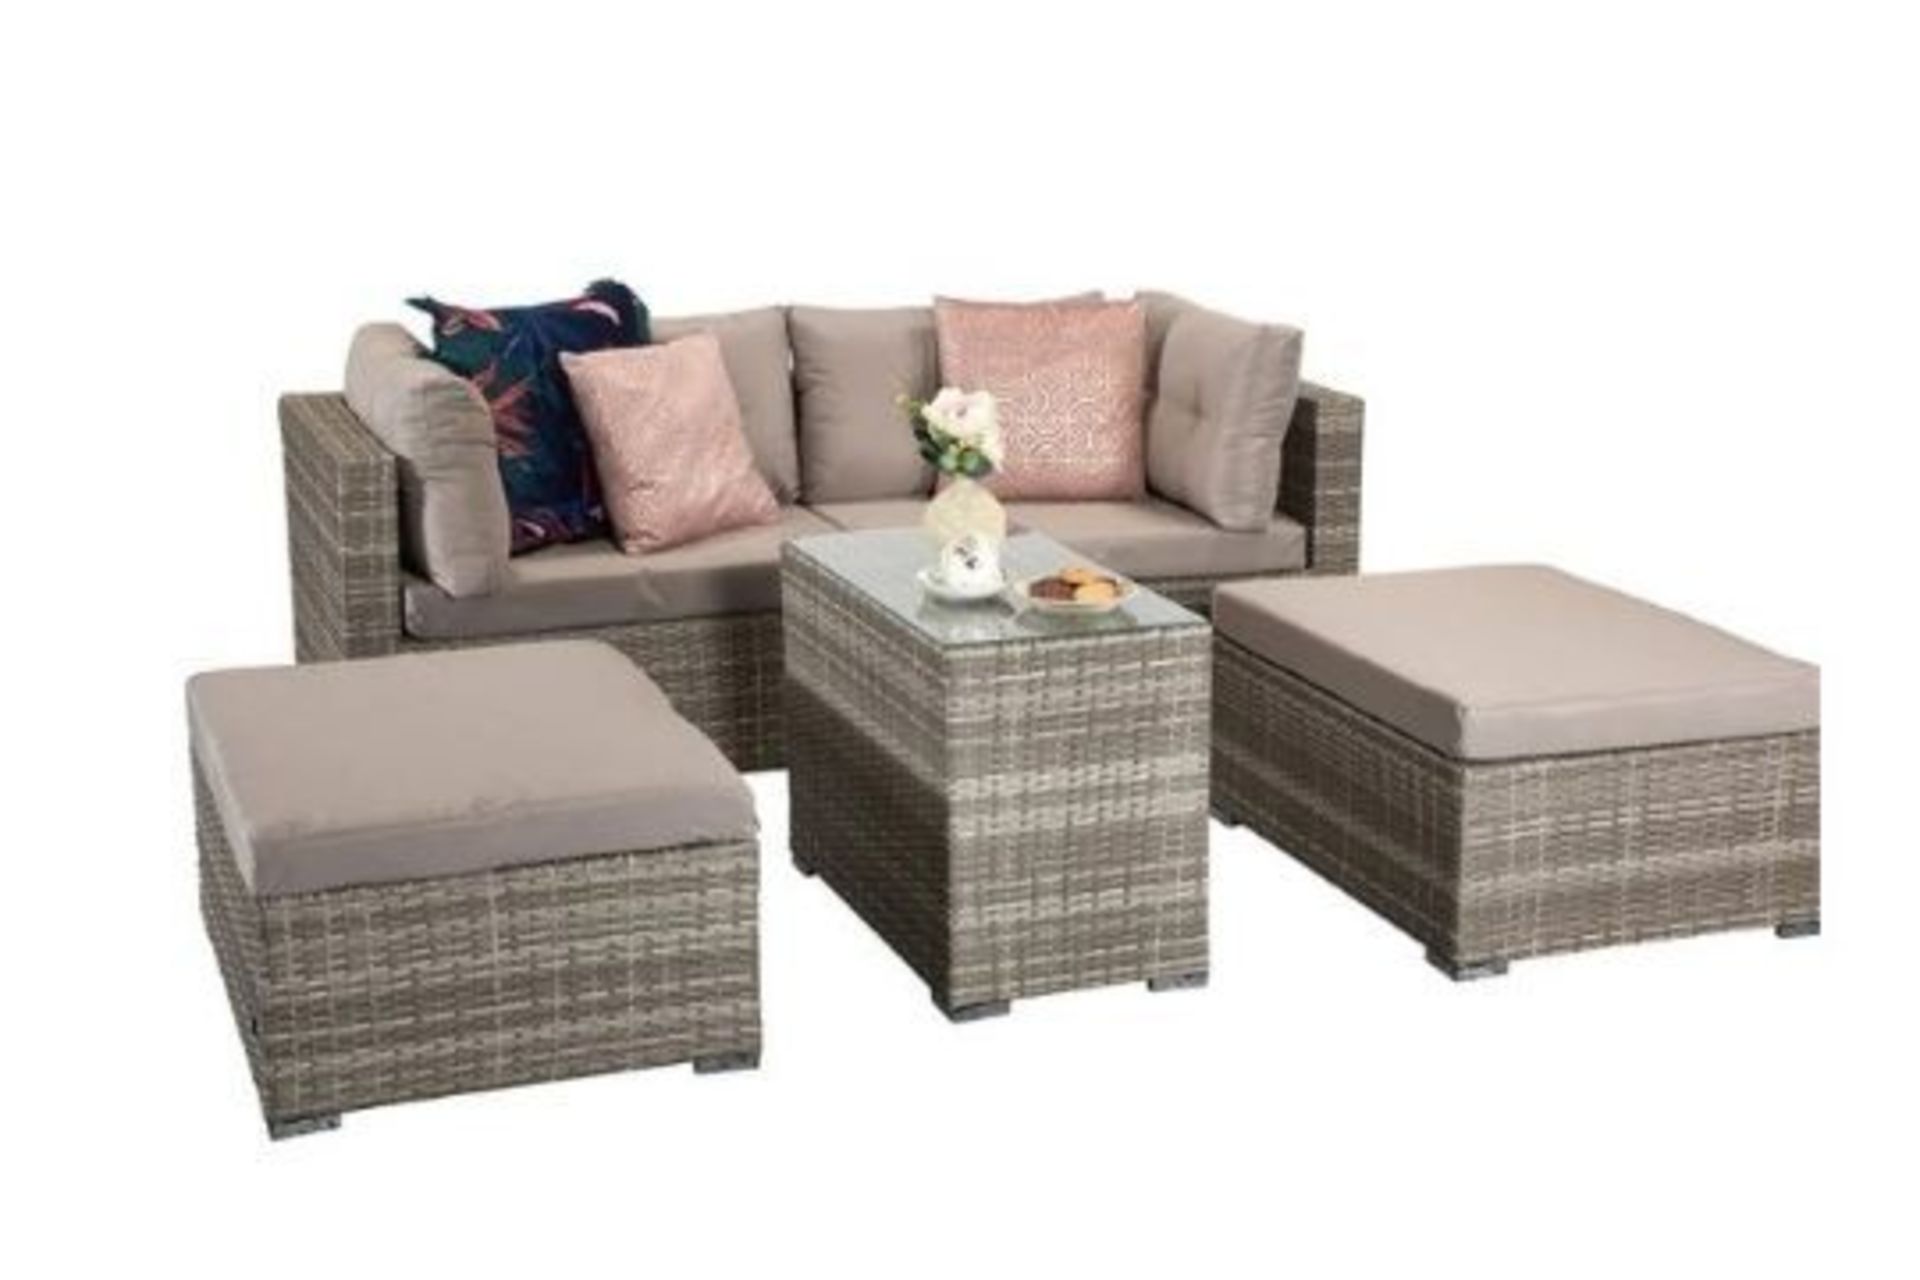 New & Boxed Luxury Signature Weave Garden UV Treated Rattan Harper Grey Stackable Multifunctional - Image 5 of 5